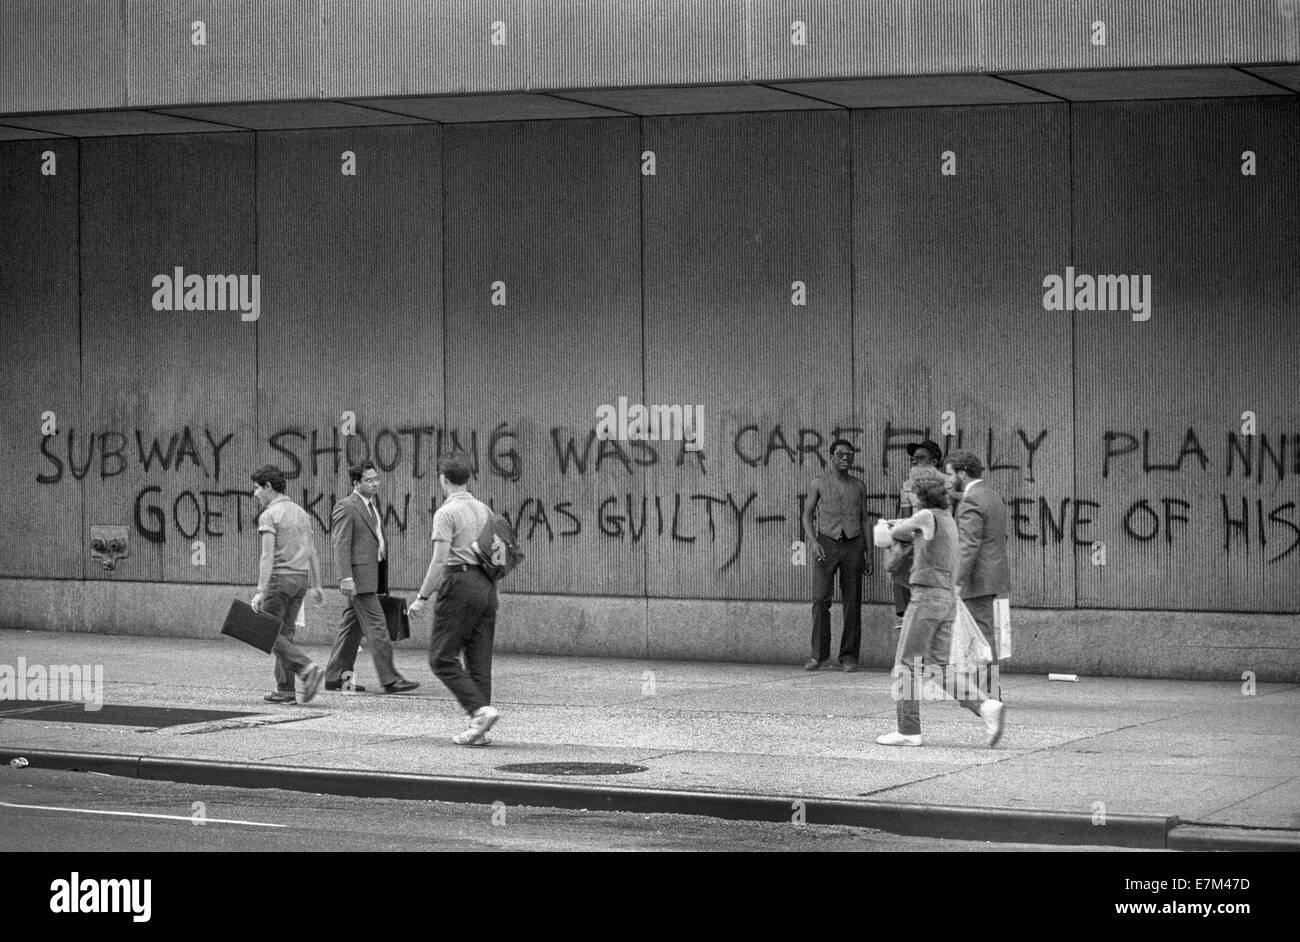 Graffiti on a wall in New York City in 1985 is critical of Bernard Goetz the so-called 'Subway Vigilante' who shot four African American men he claimed attempted to rob  him. Stock Photo